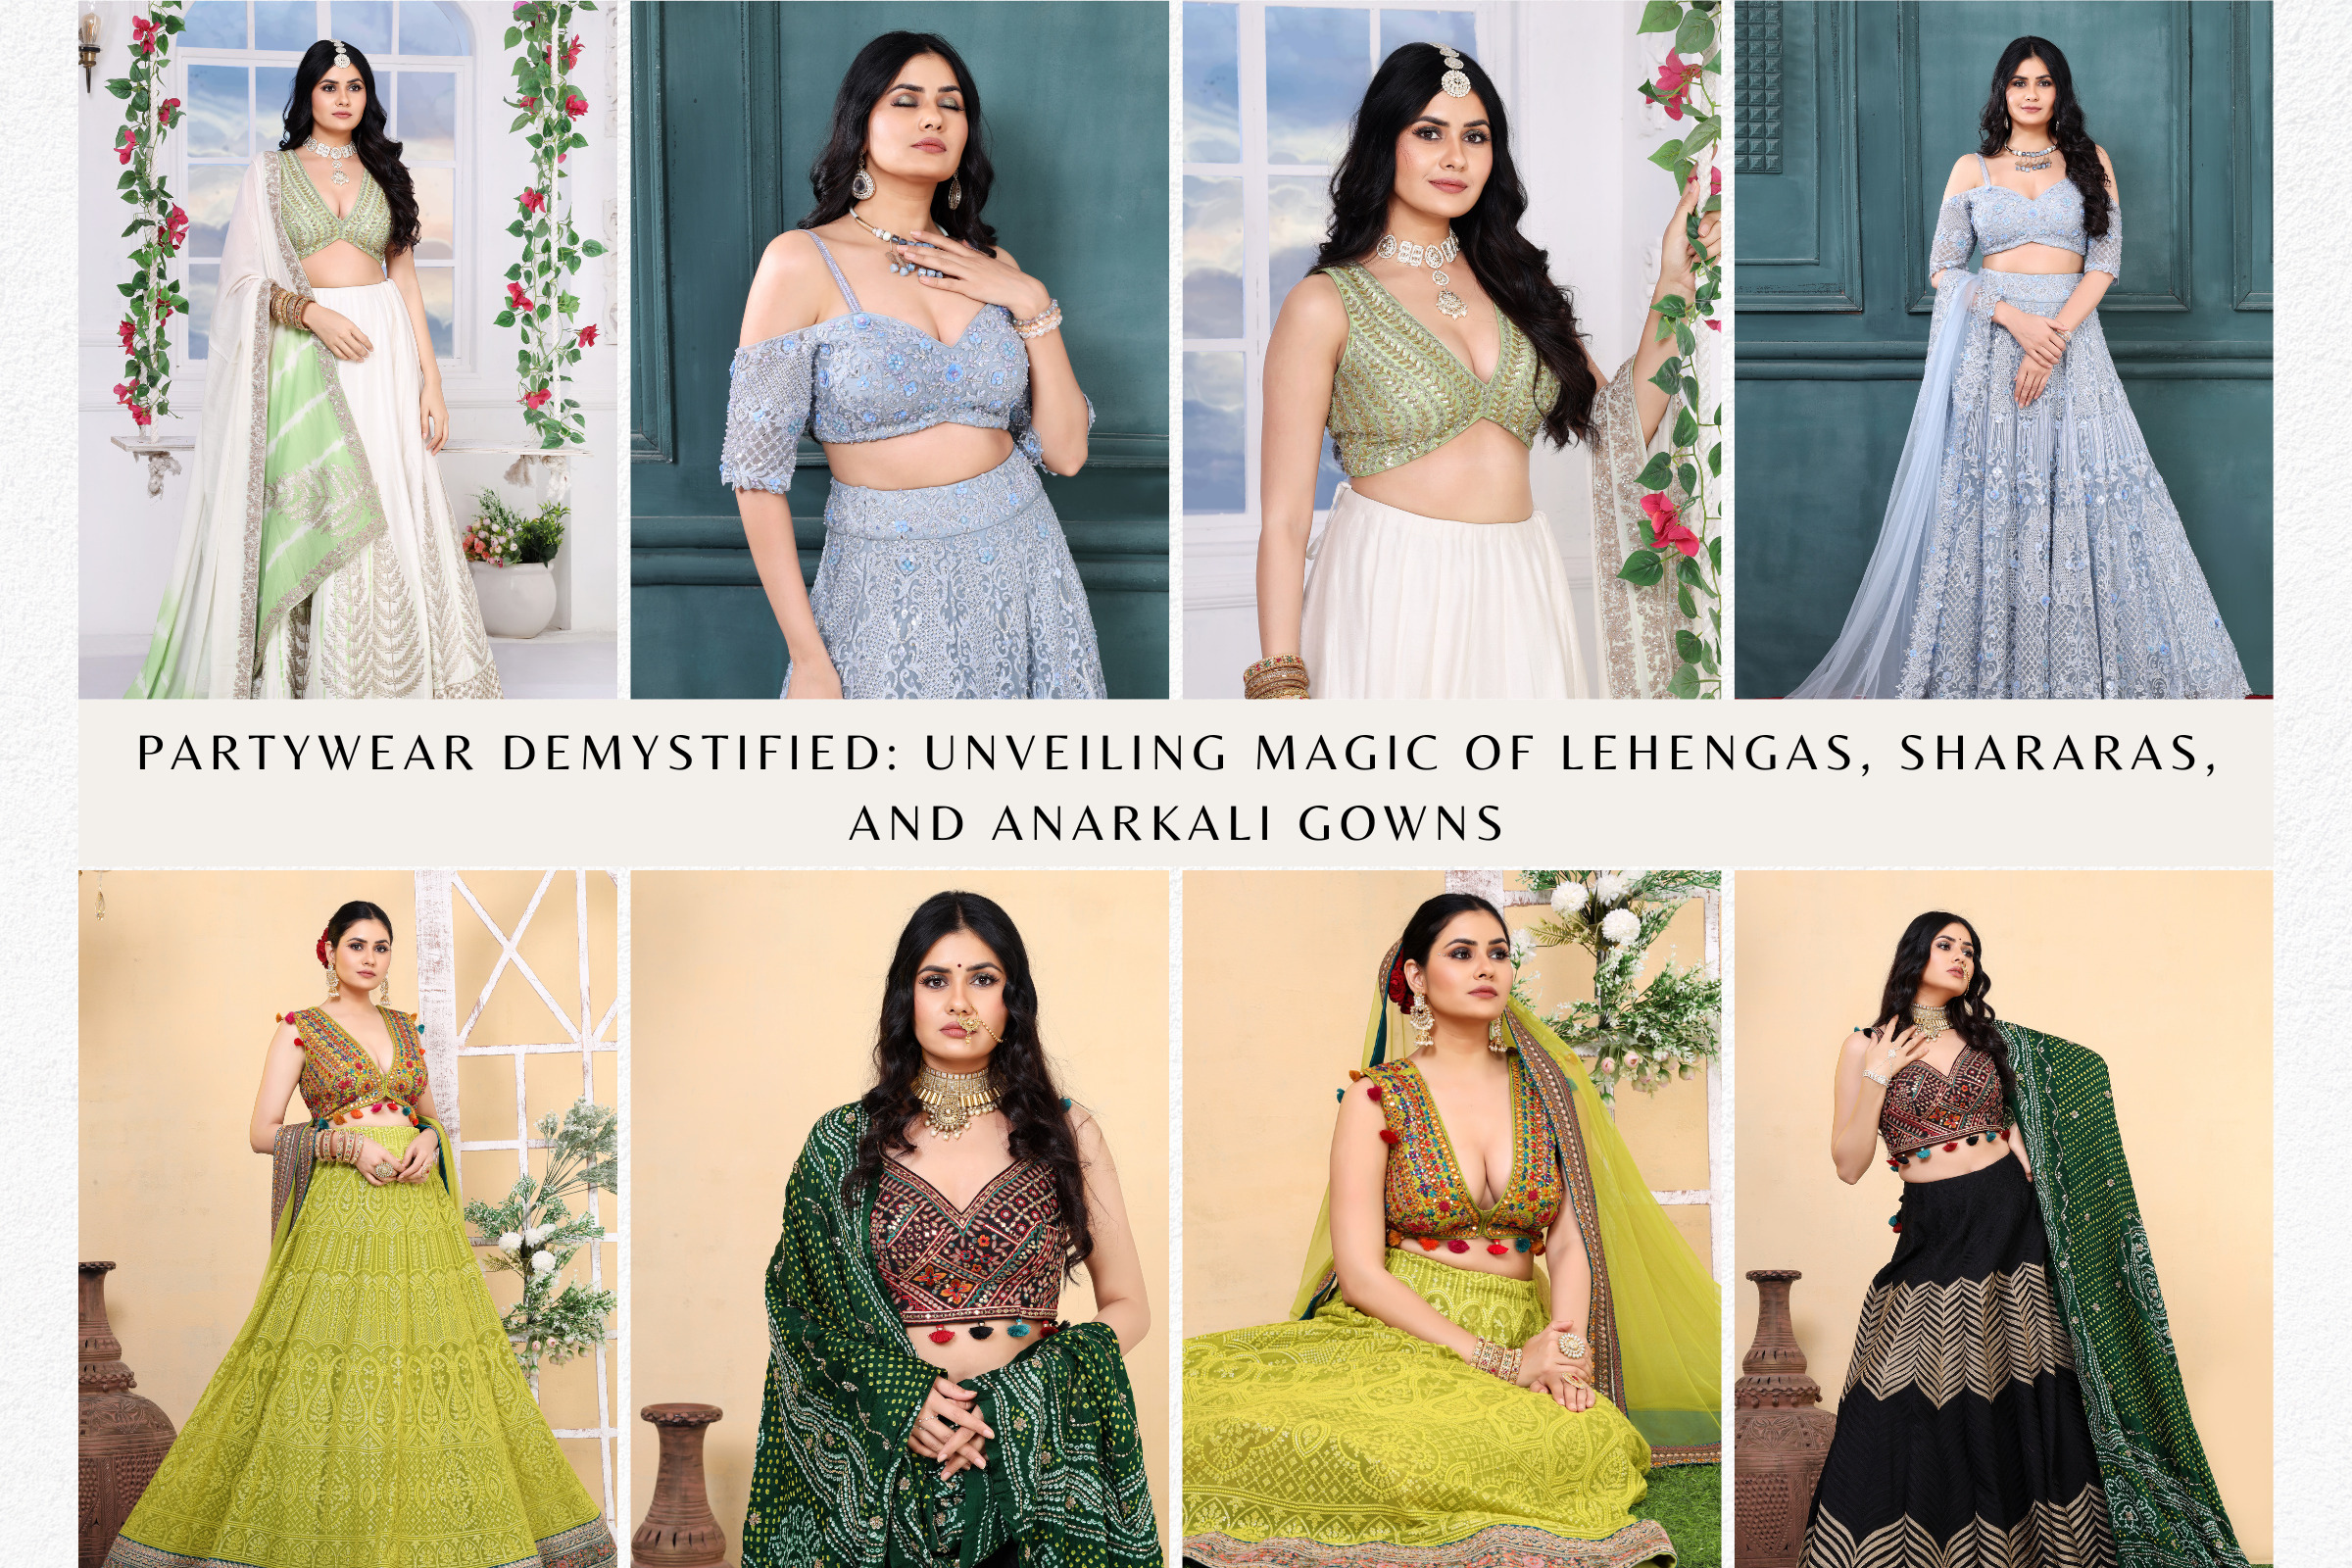 8 Types Of Glamorous Lehenga For Special Occasions - Tradeindia